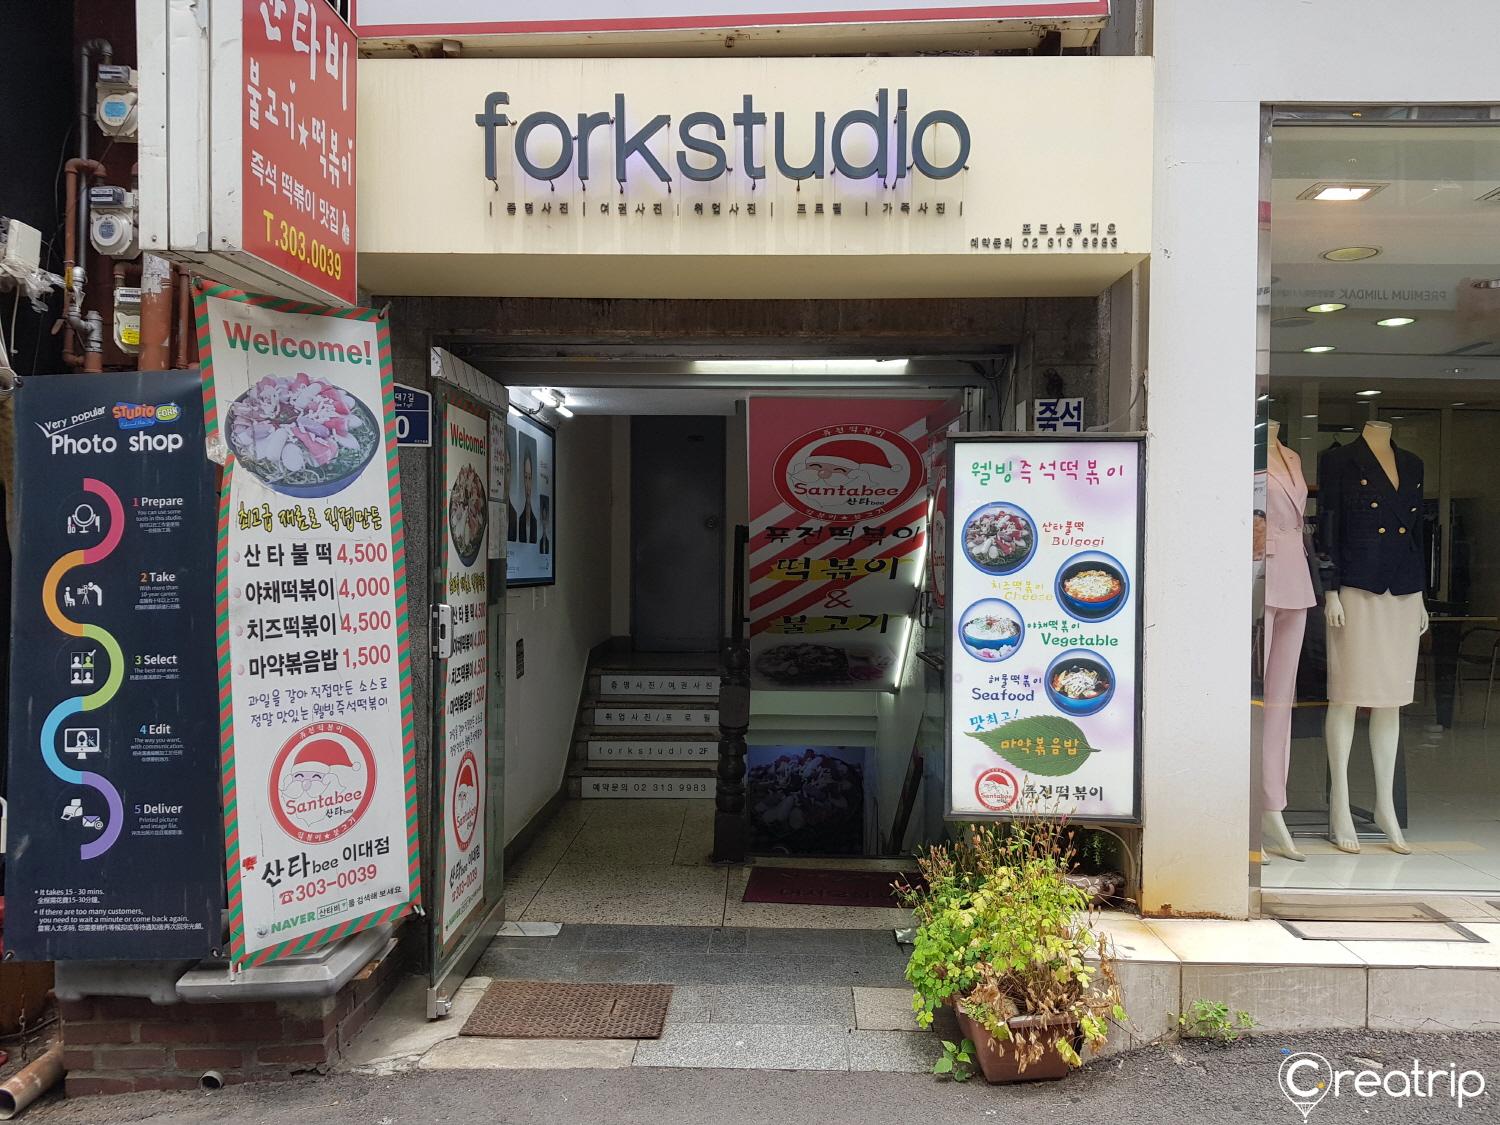 A retail building for 포크스튜디오 with a plant-filled facade and advertising logos.